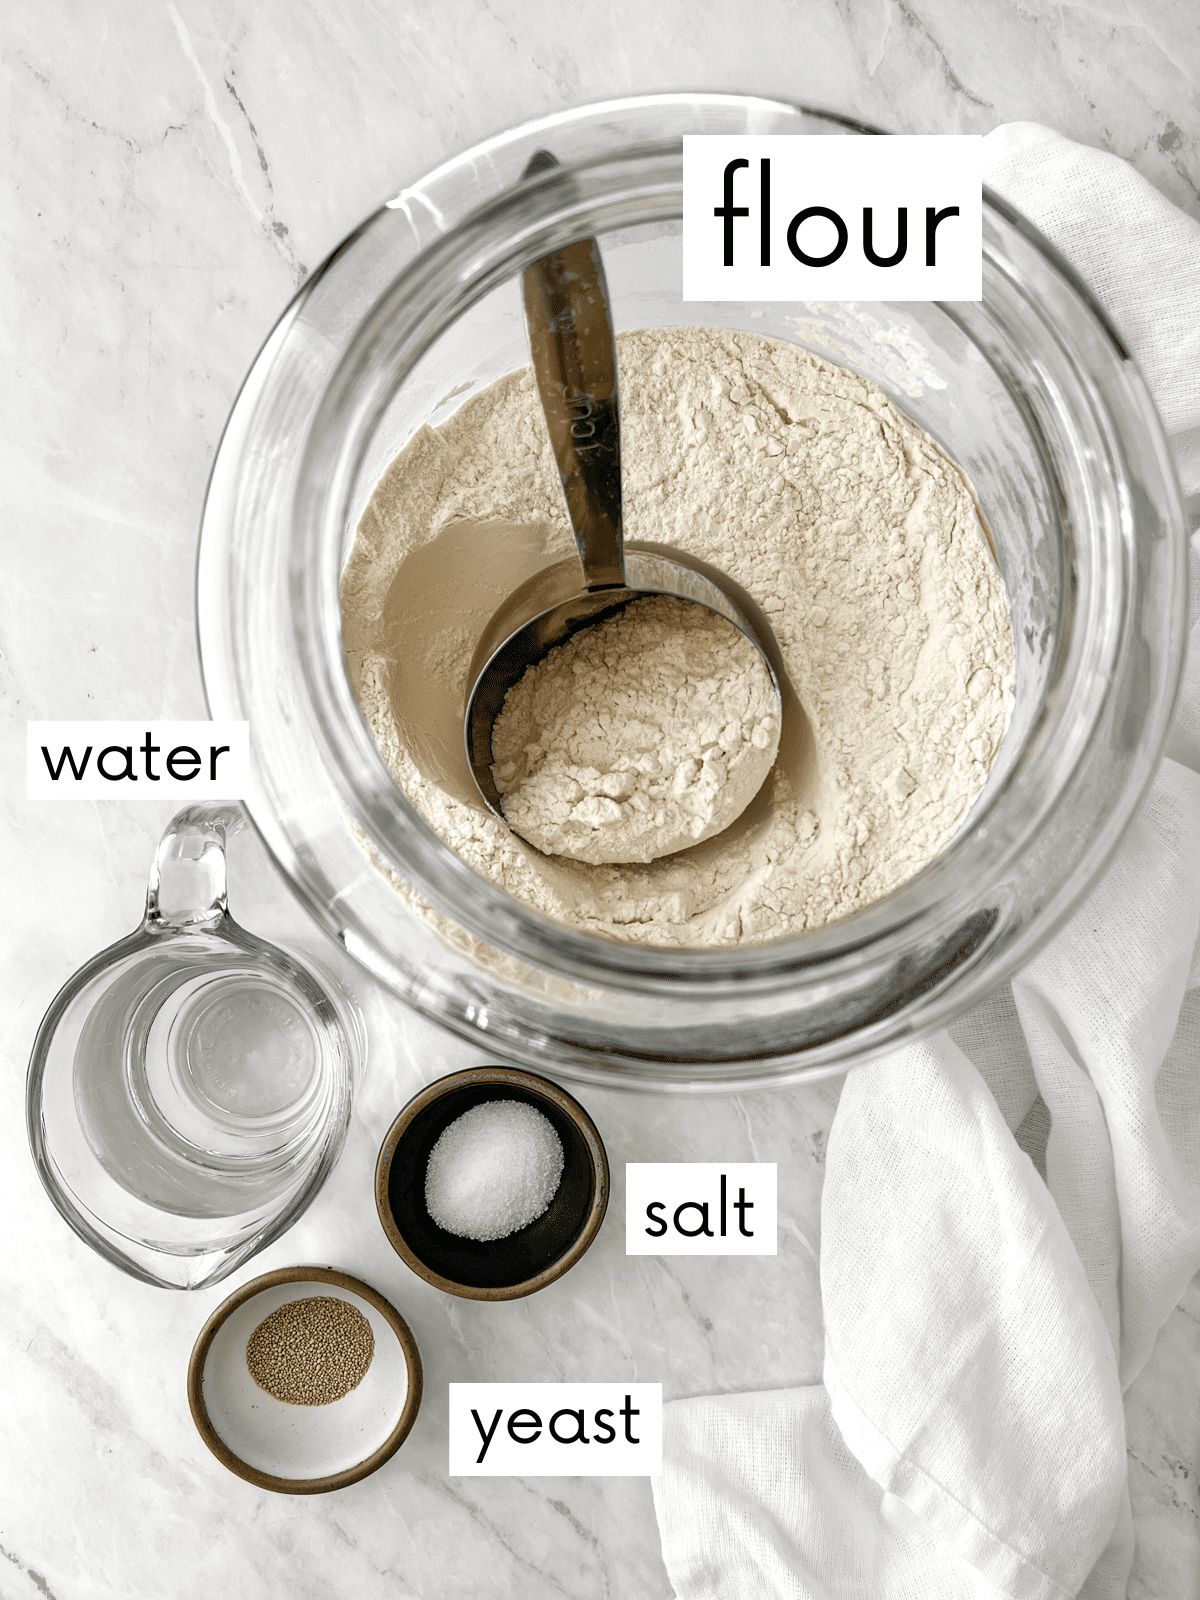 Flour, salt, water, and yeast measured into bowls to make peasant bread.